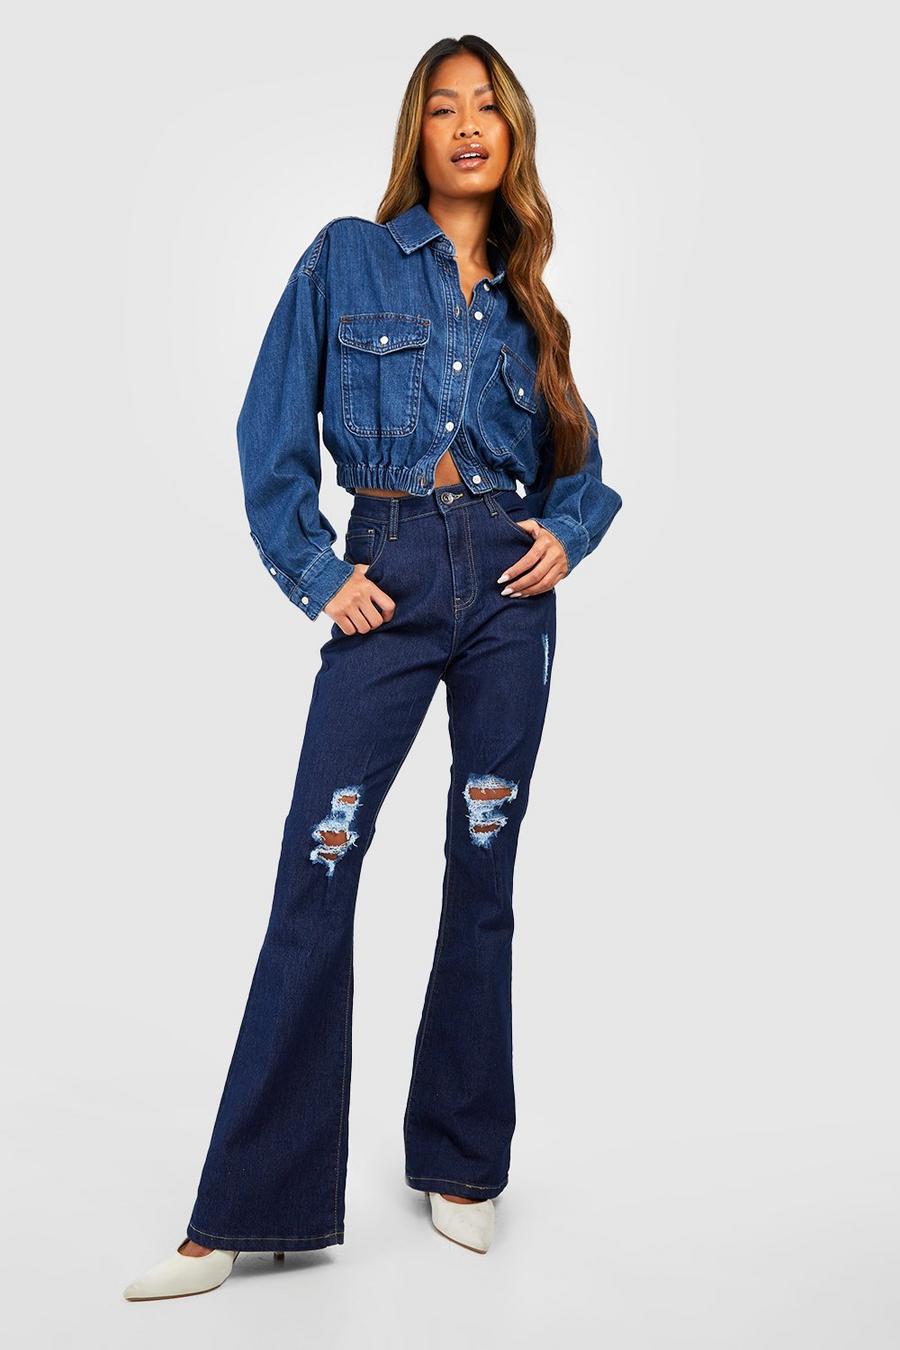 Indigo blue High Waisted Ripped Flared Jeans